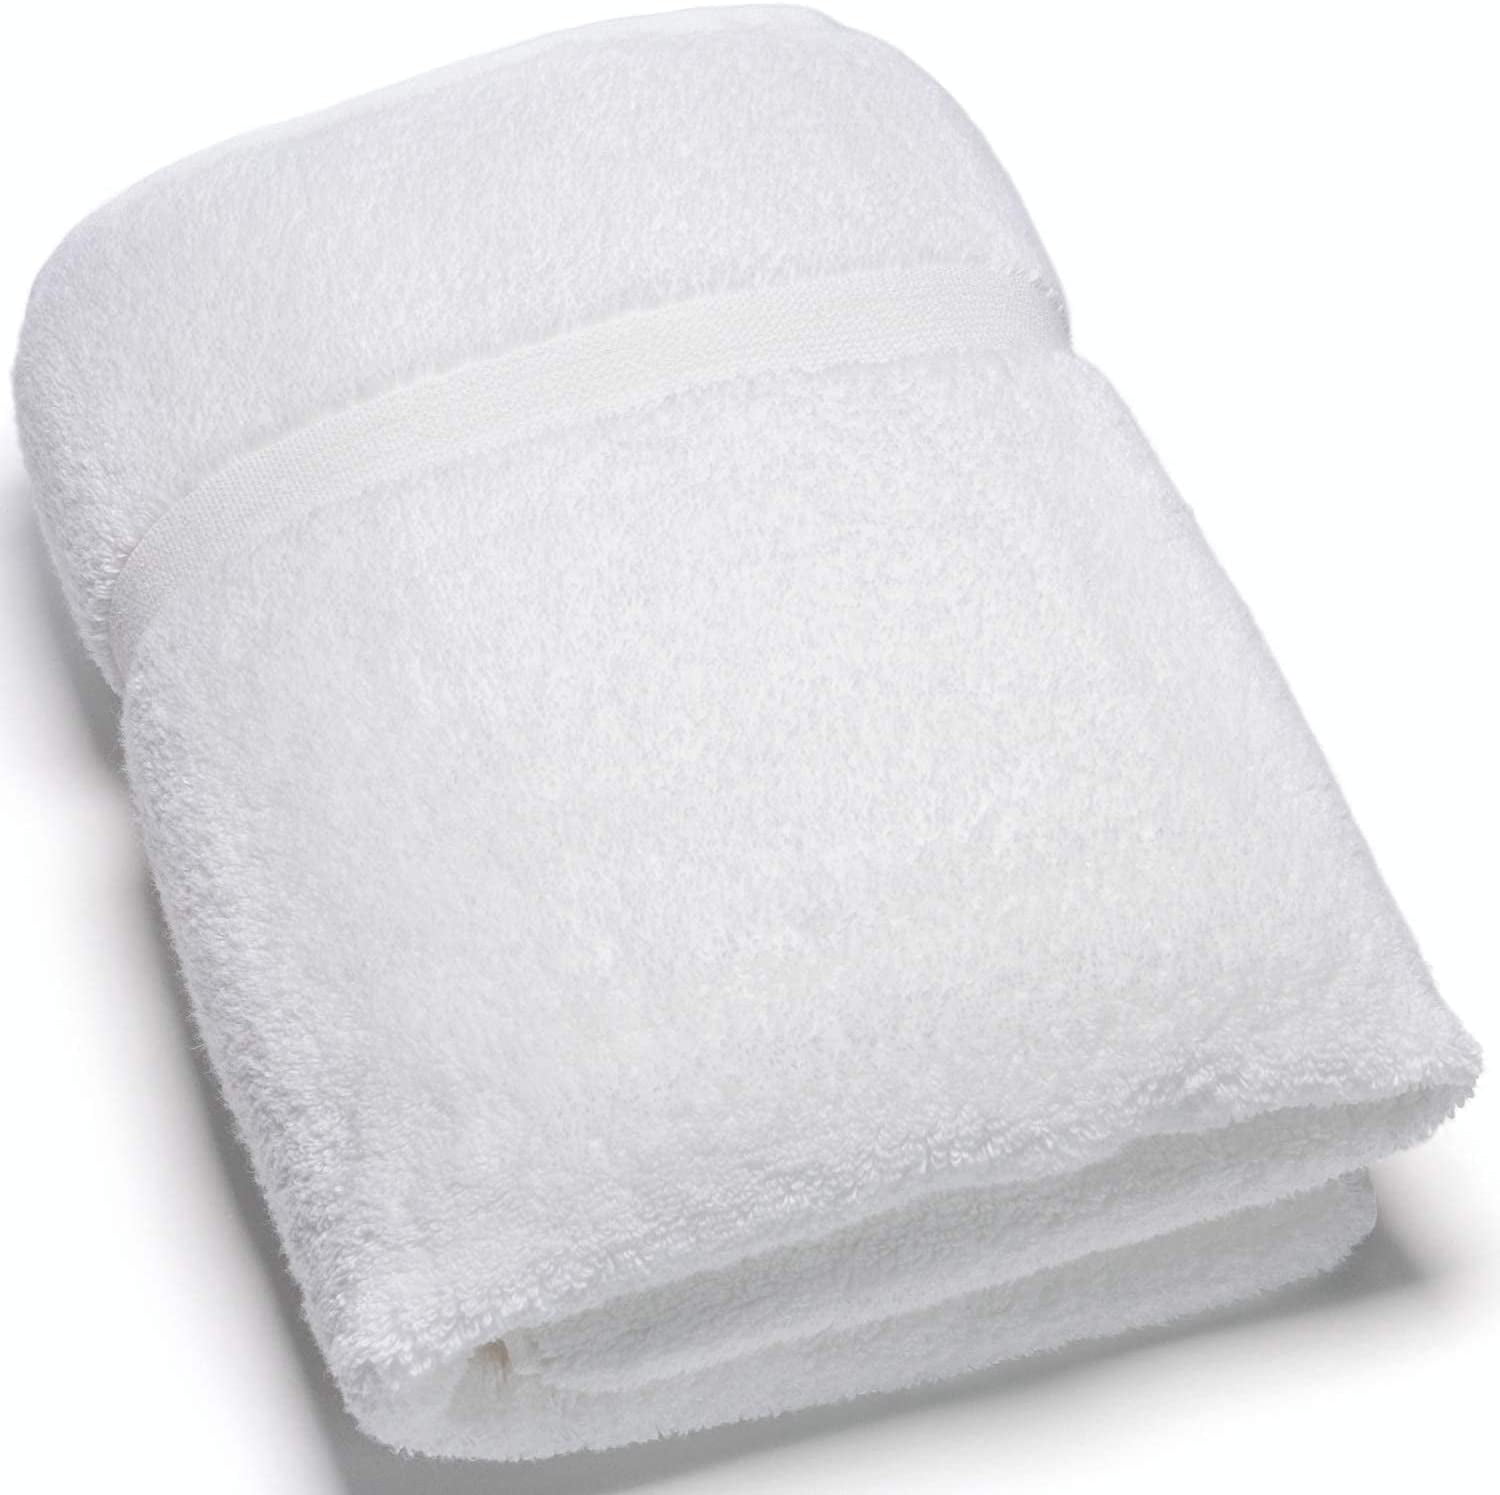 Miracle Cotton and Silver Ion Antimicrobial Plush Bathroom Hand Towel,  White, 1 Piece - Kroger